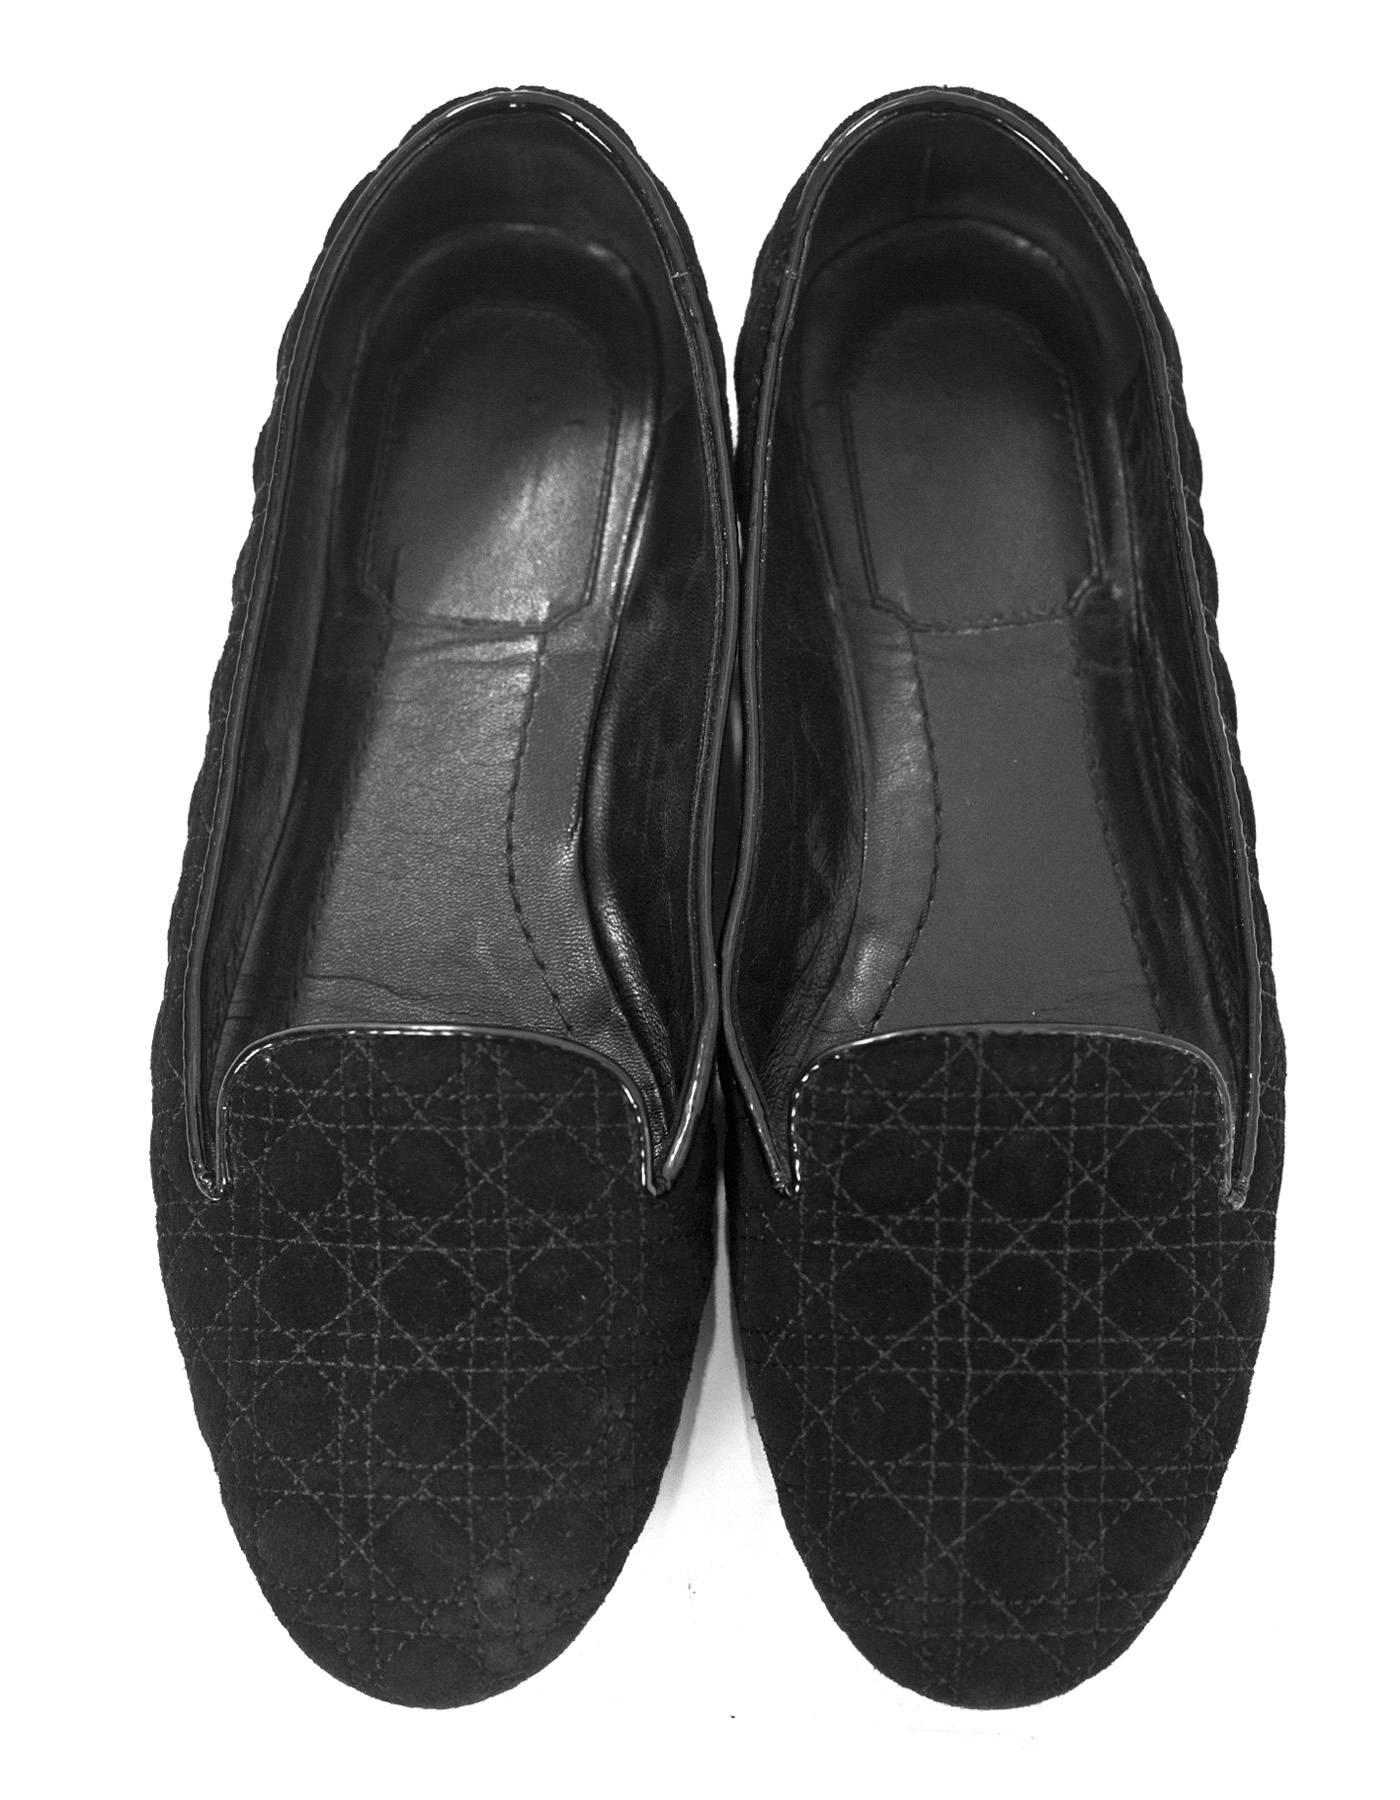 Christian Dior Black Suede Quilted Loafers Sz 35 rt. $610 In Good Condition In New York, NY